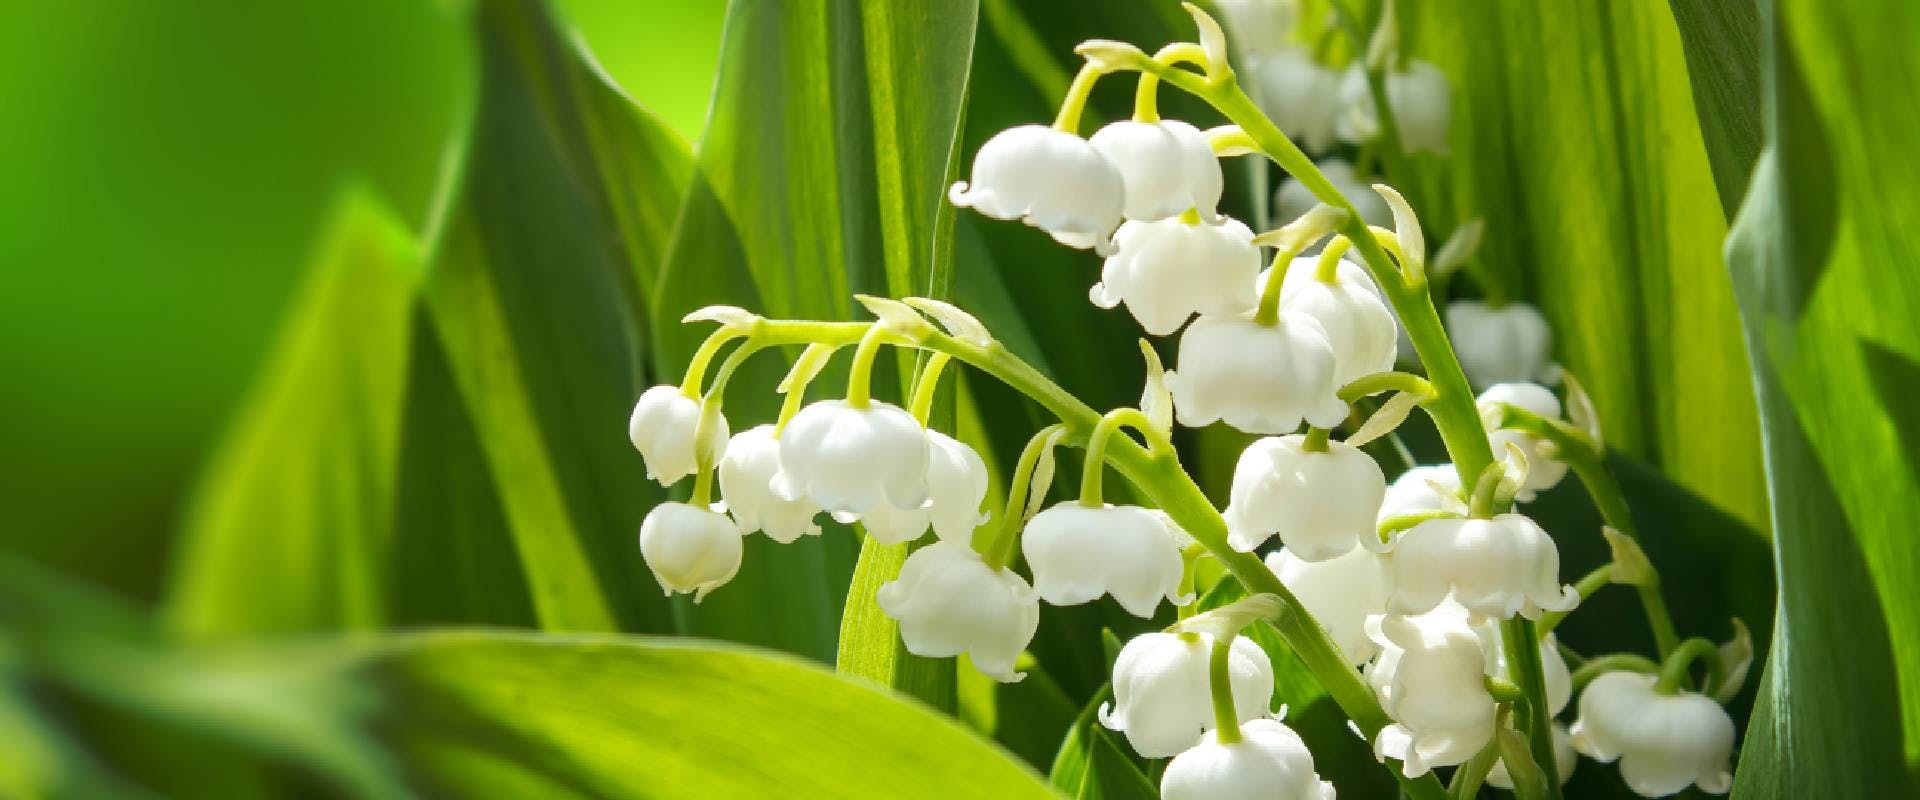 Lily of the valley plant